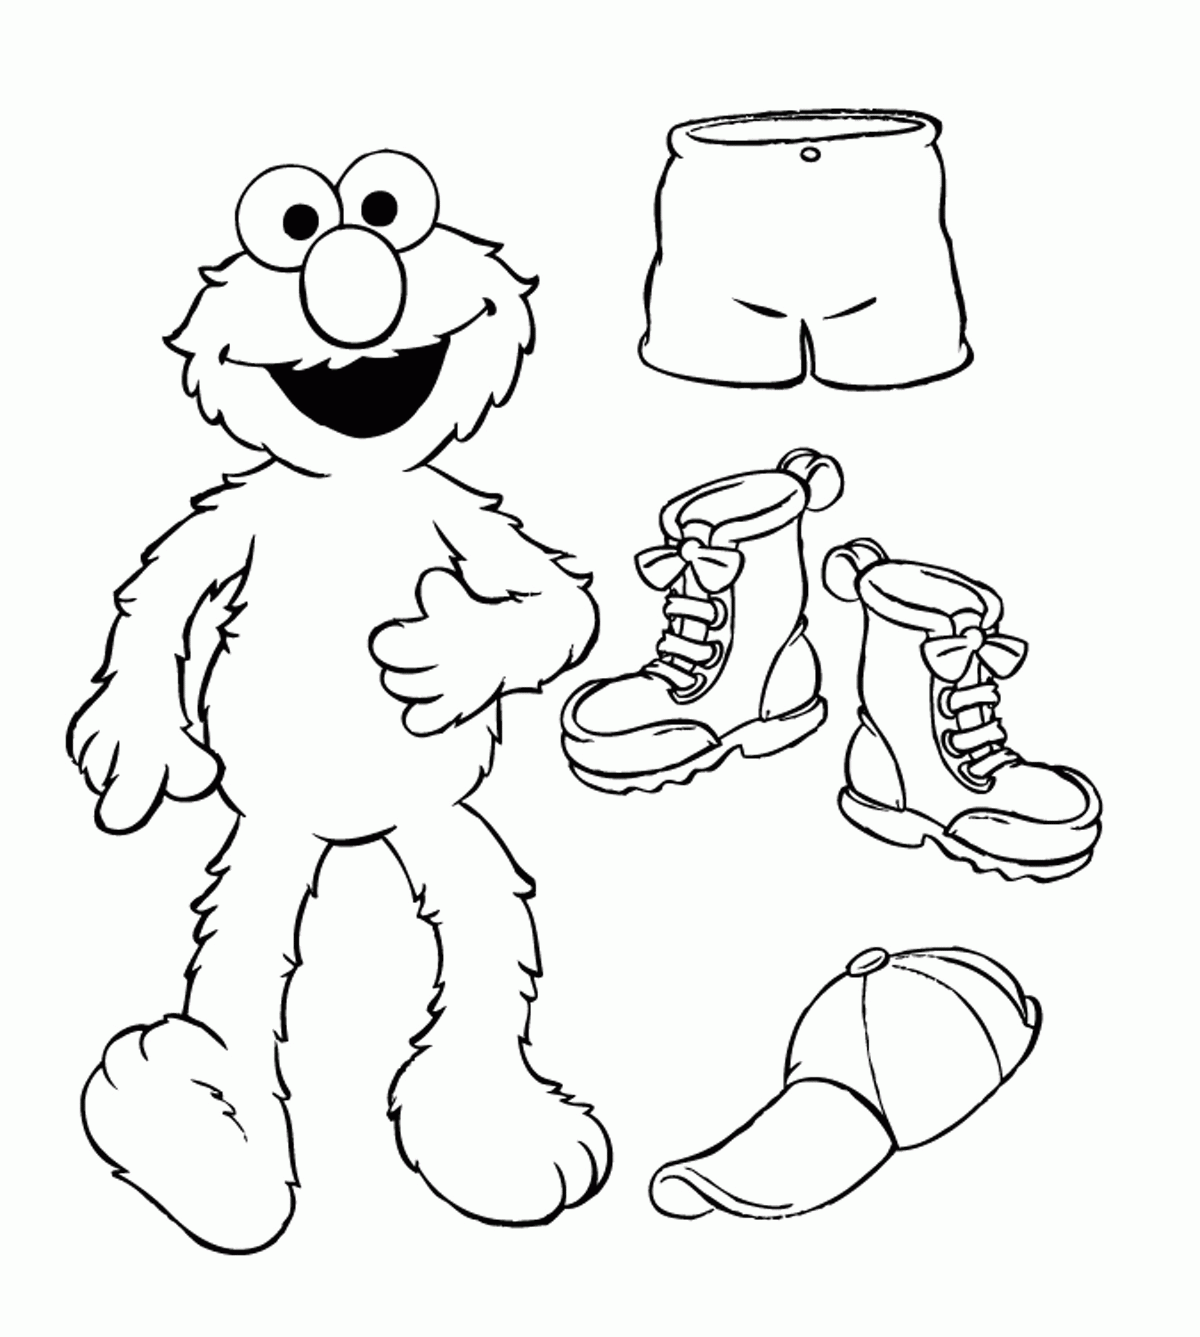 Coloring : Coloring Pages Elmo Elmo Work Gif Slide Download World ...